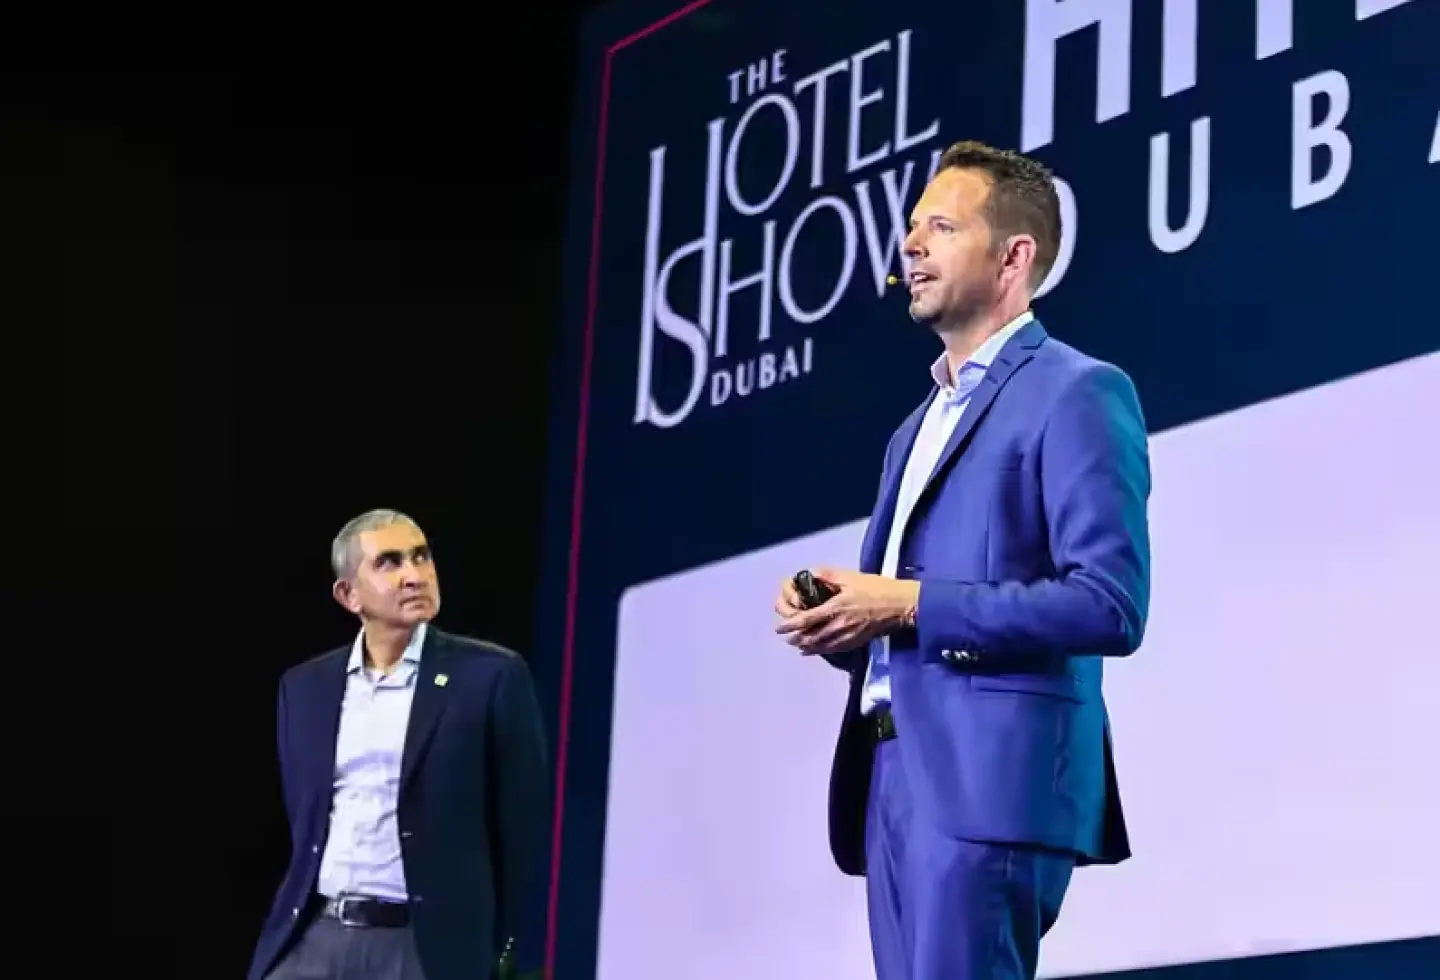 Image : The Hotel Show 2024